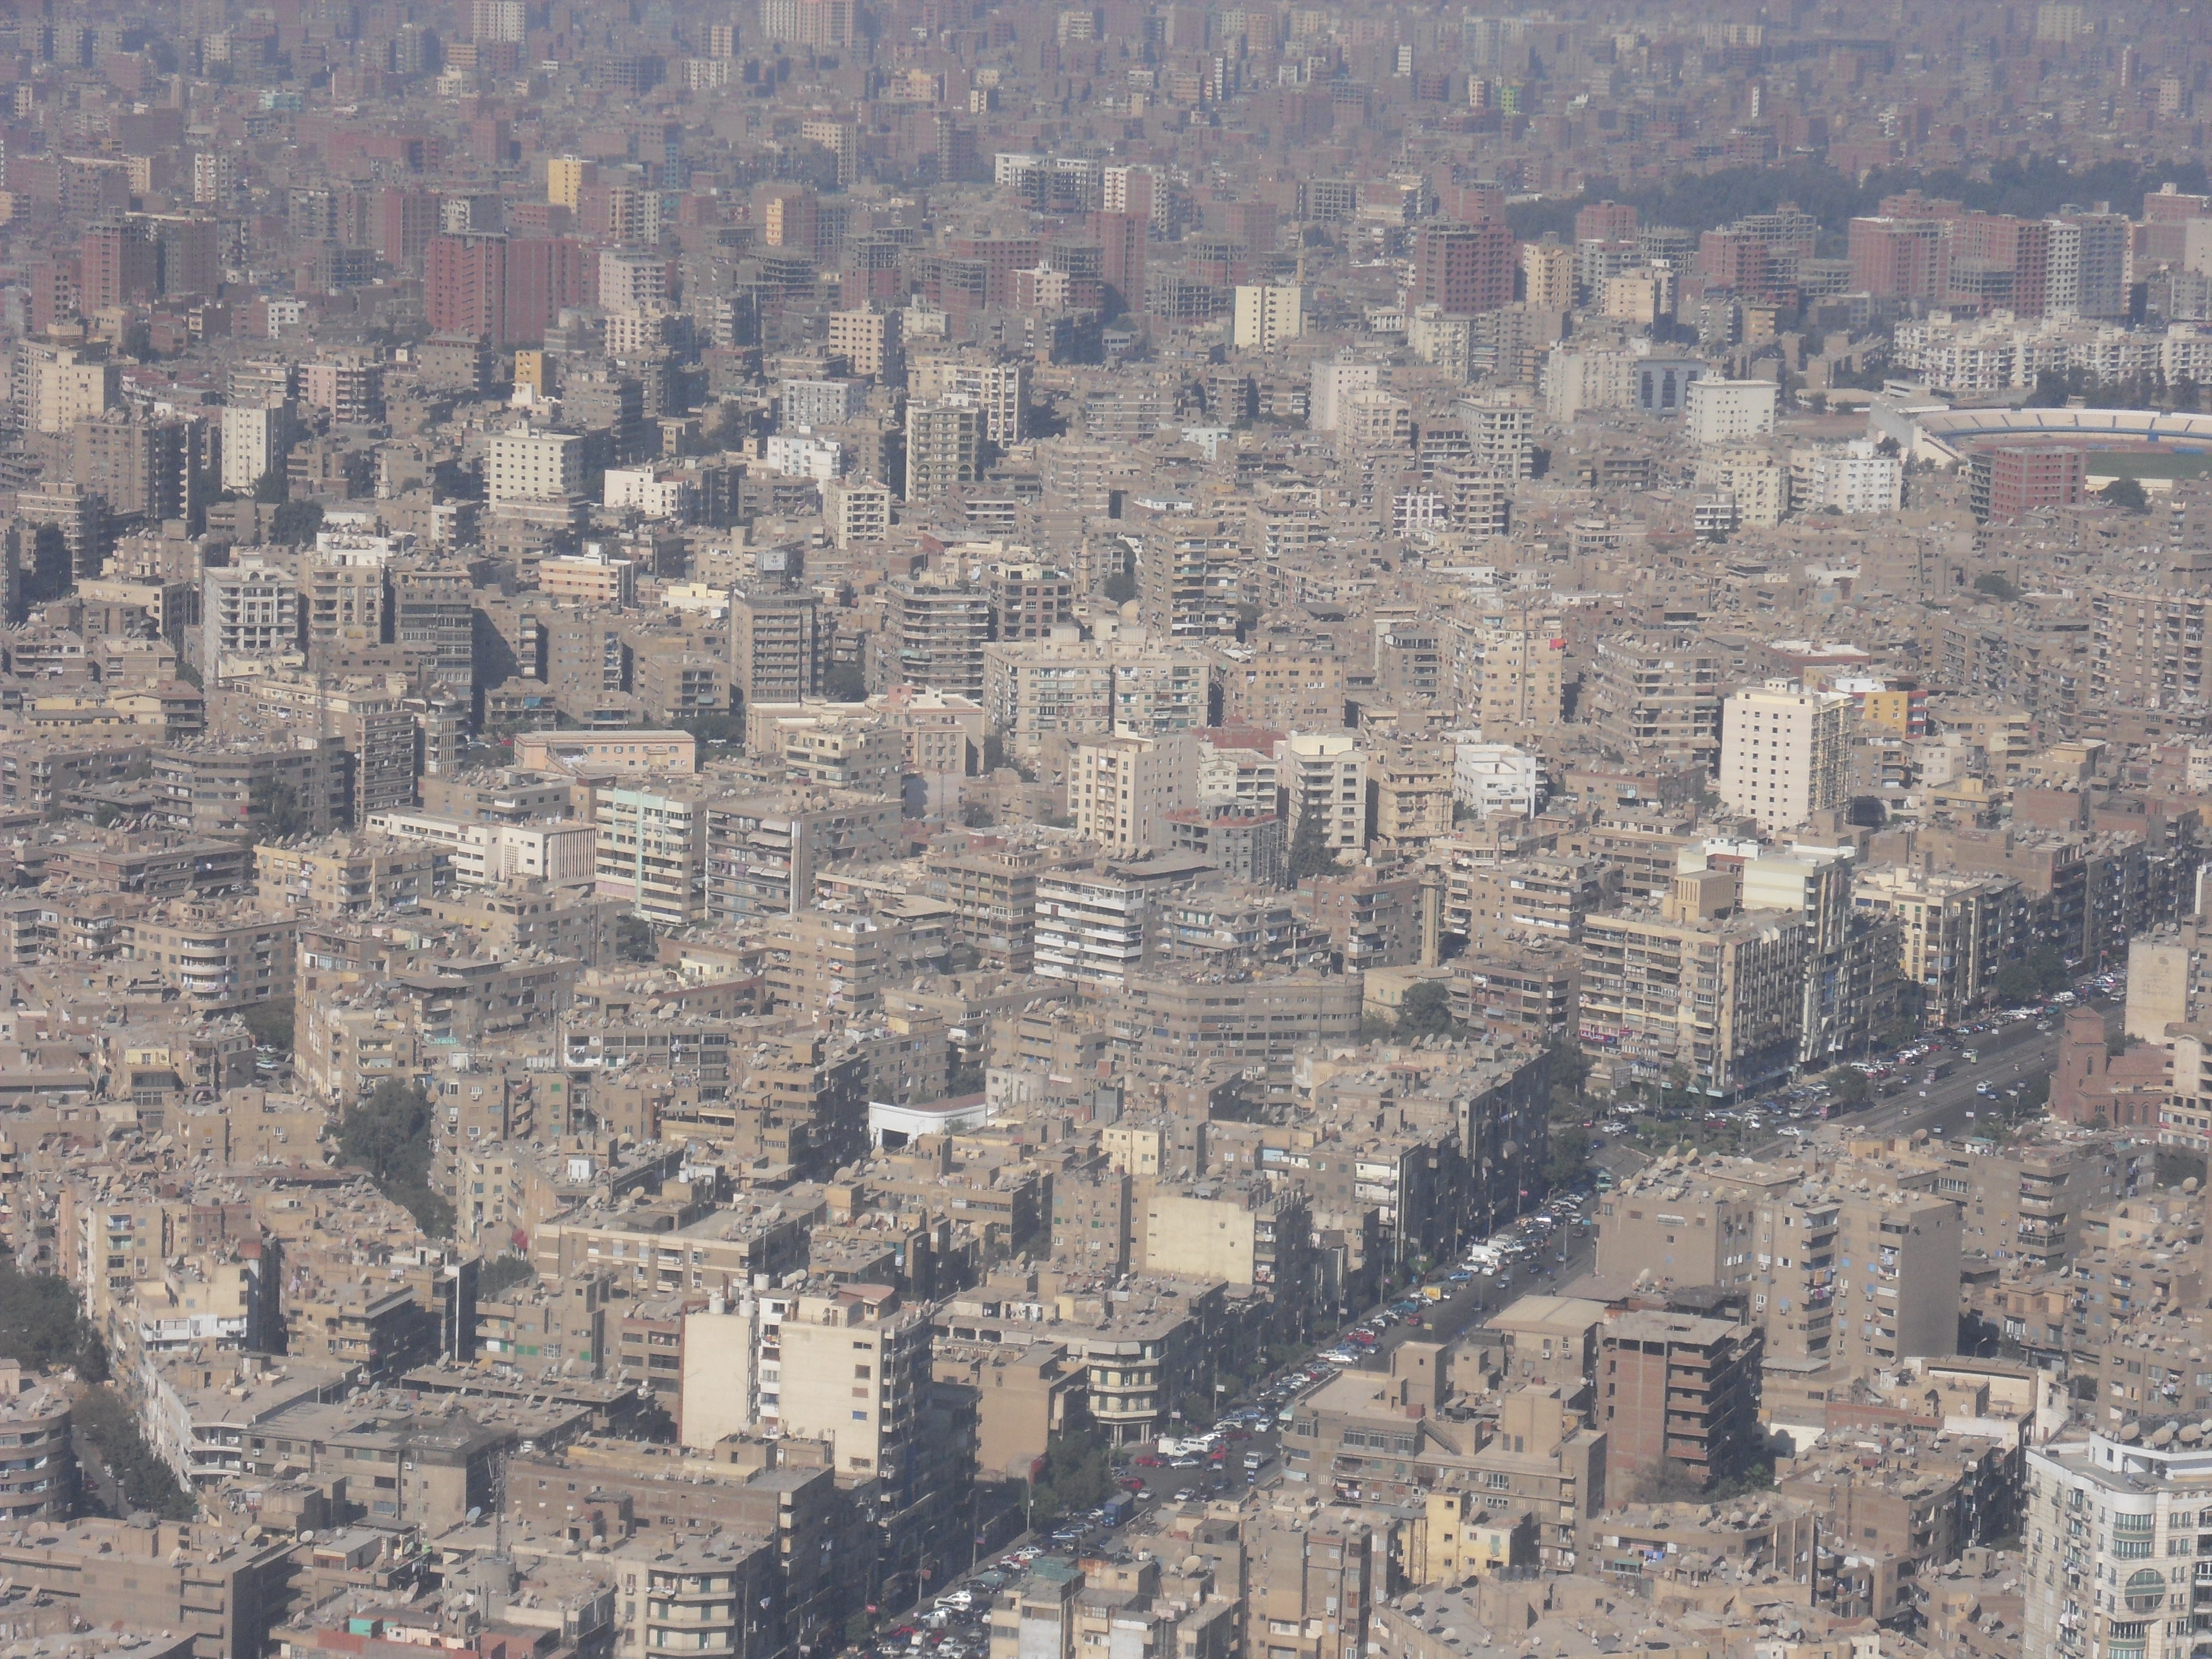 In Cairo, it is rarely possible to see more than a few kilometers ahead of you due to the smog.